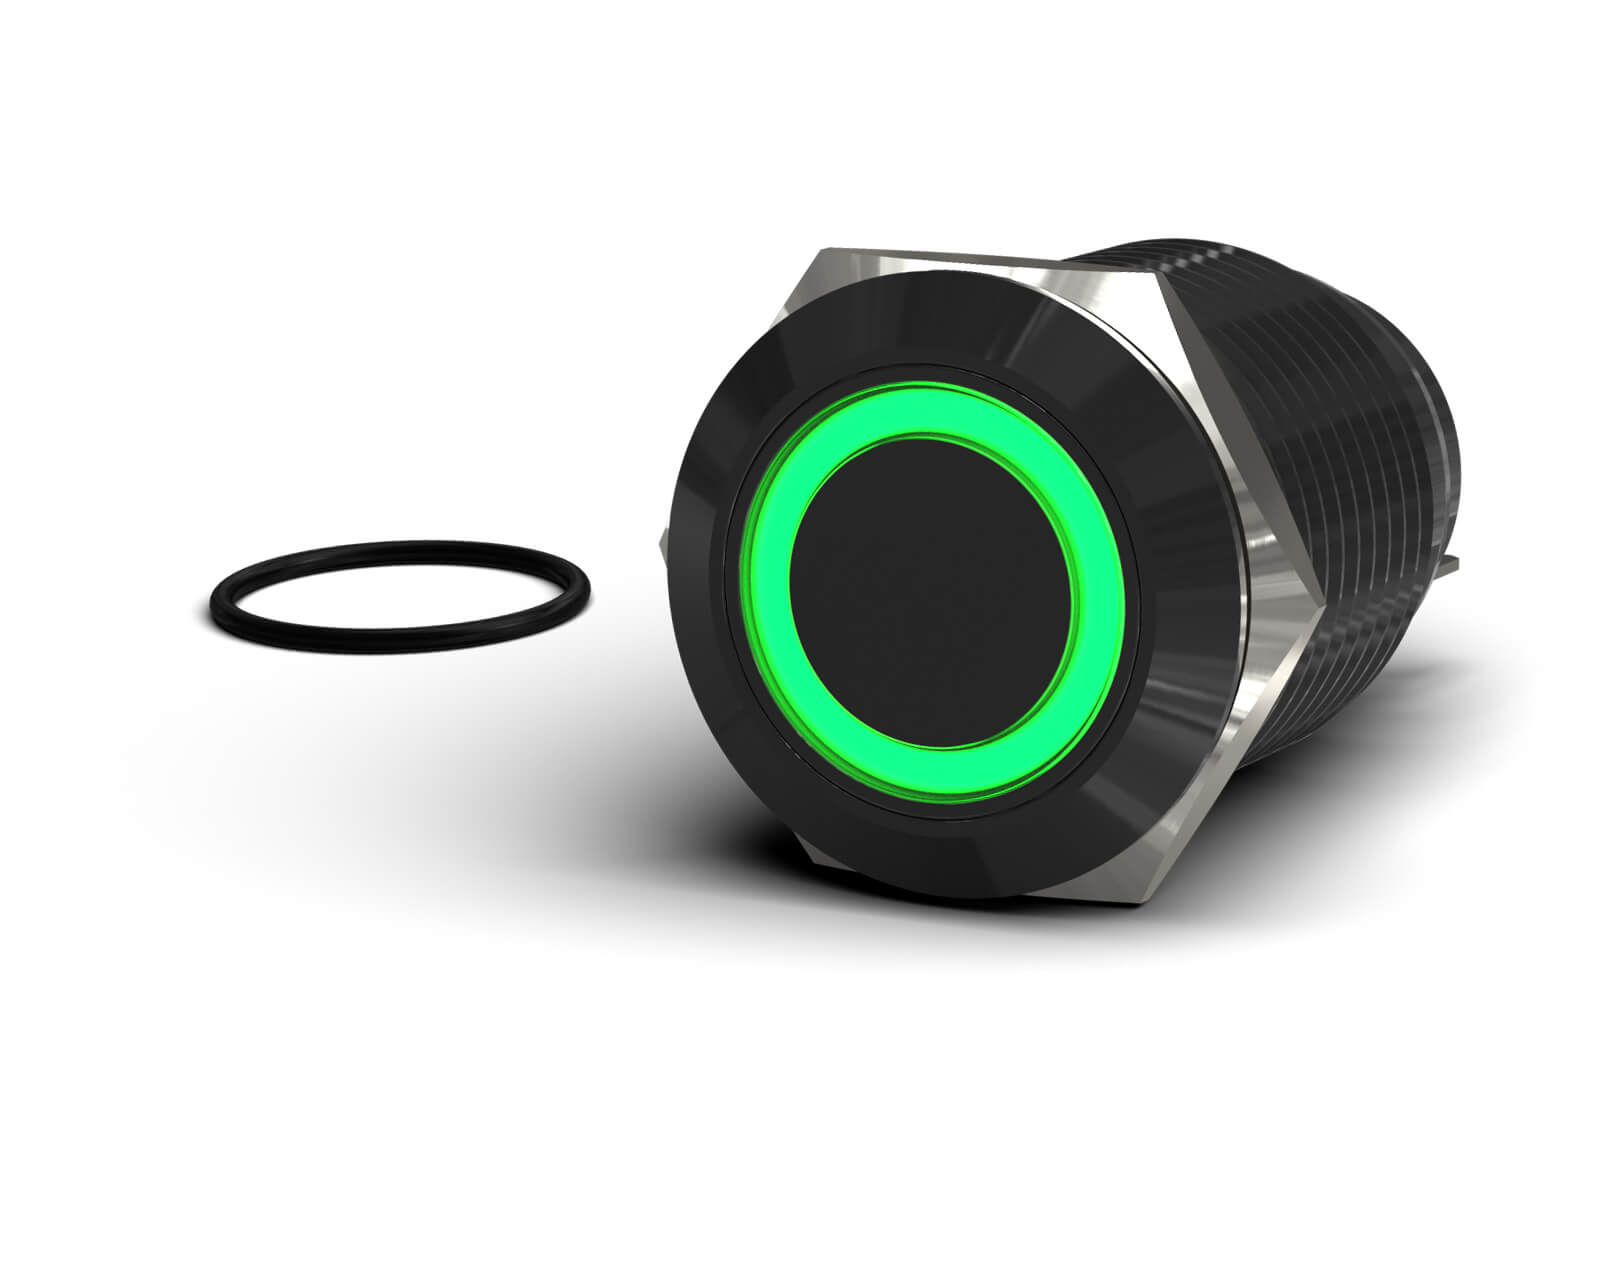 PrimoChill Black Aluminum Latching Vandal Resistant Switch - 22mm - PrimoChill - KEEPING IT COOL Green LED Ring